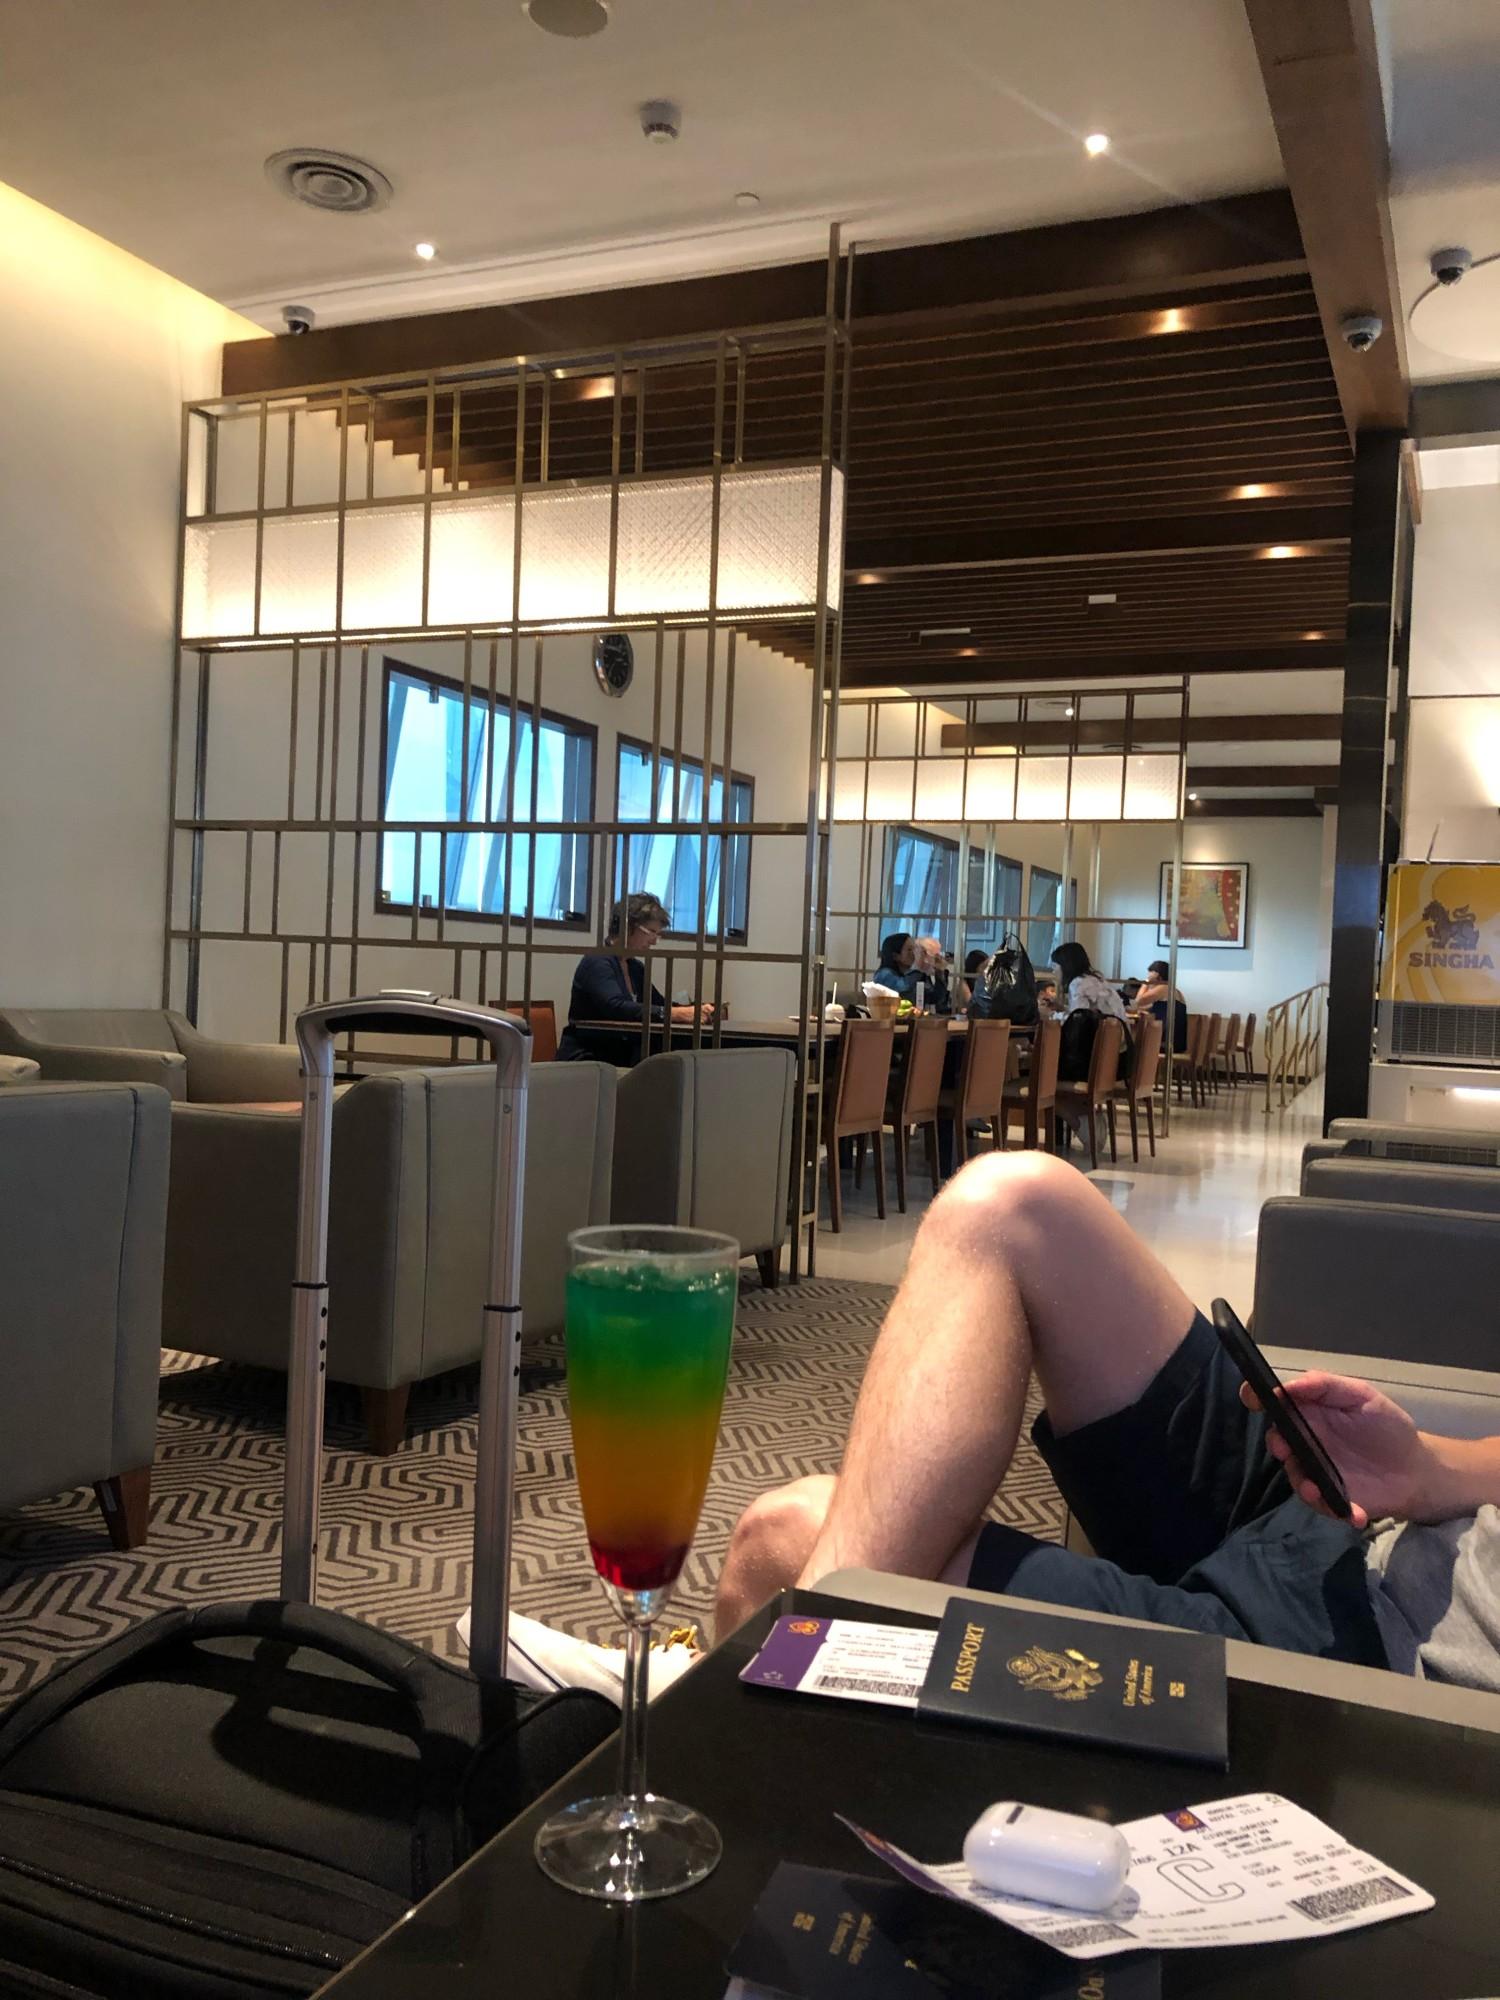 Singapore Airlines SilverKris Business Class Lounge  image 10 of 16